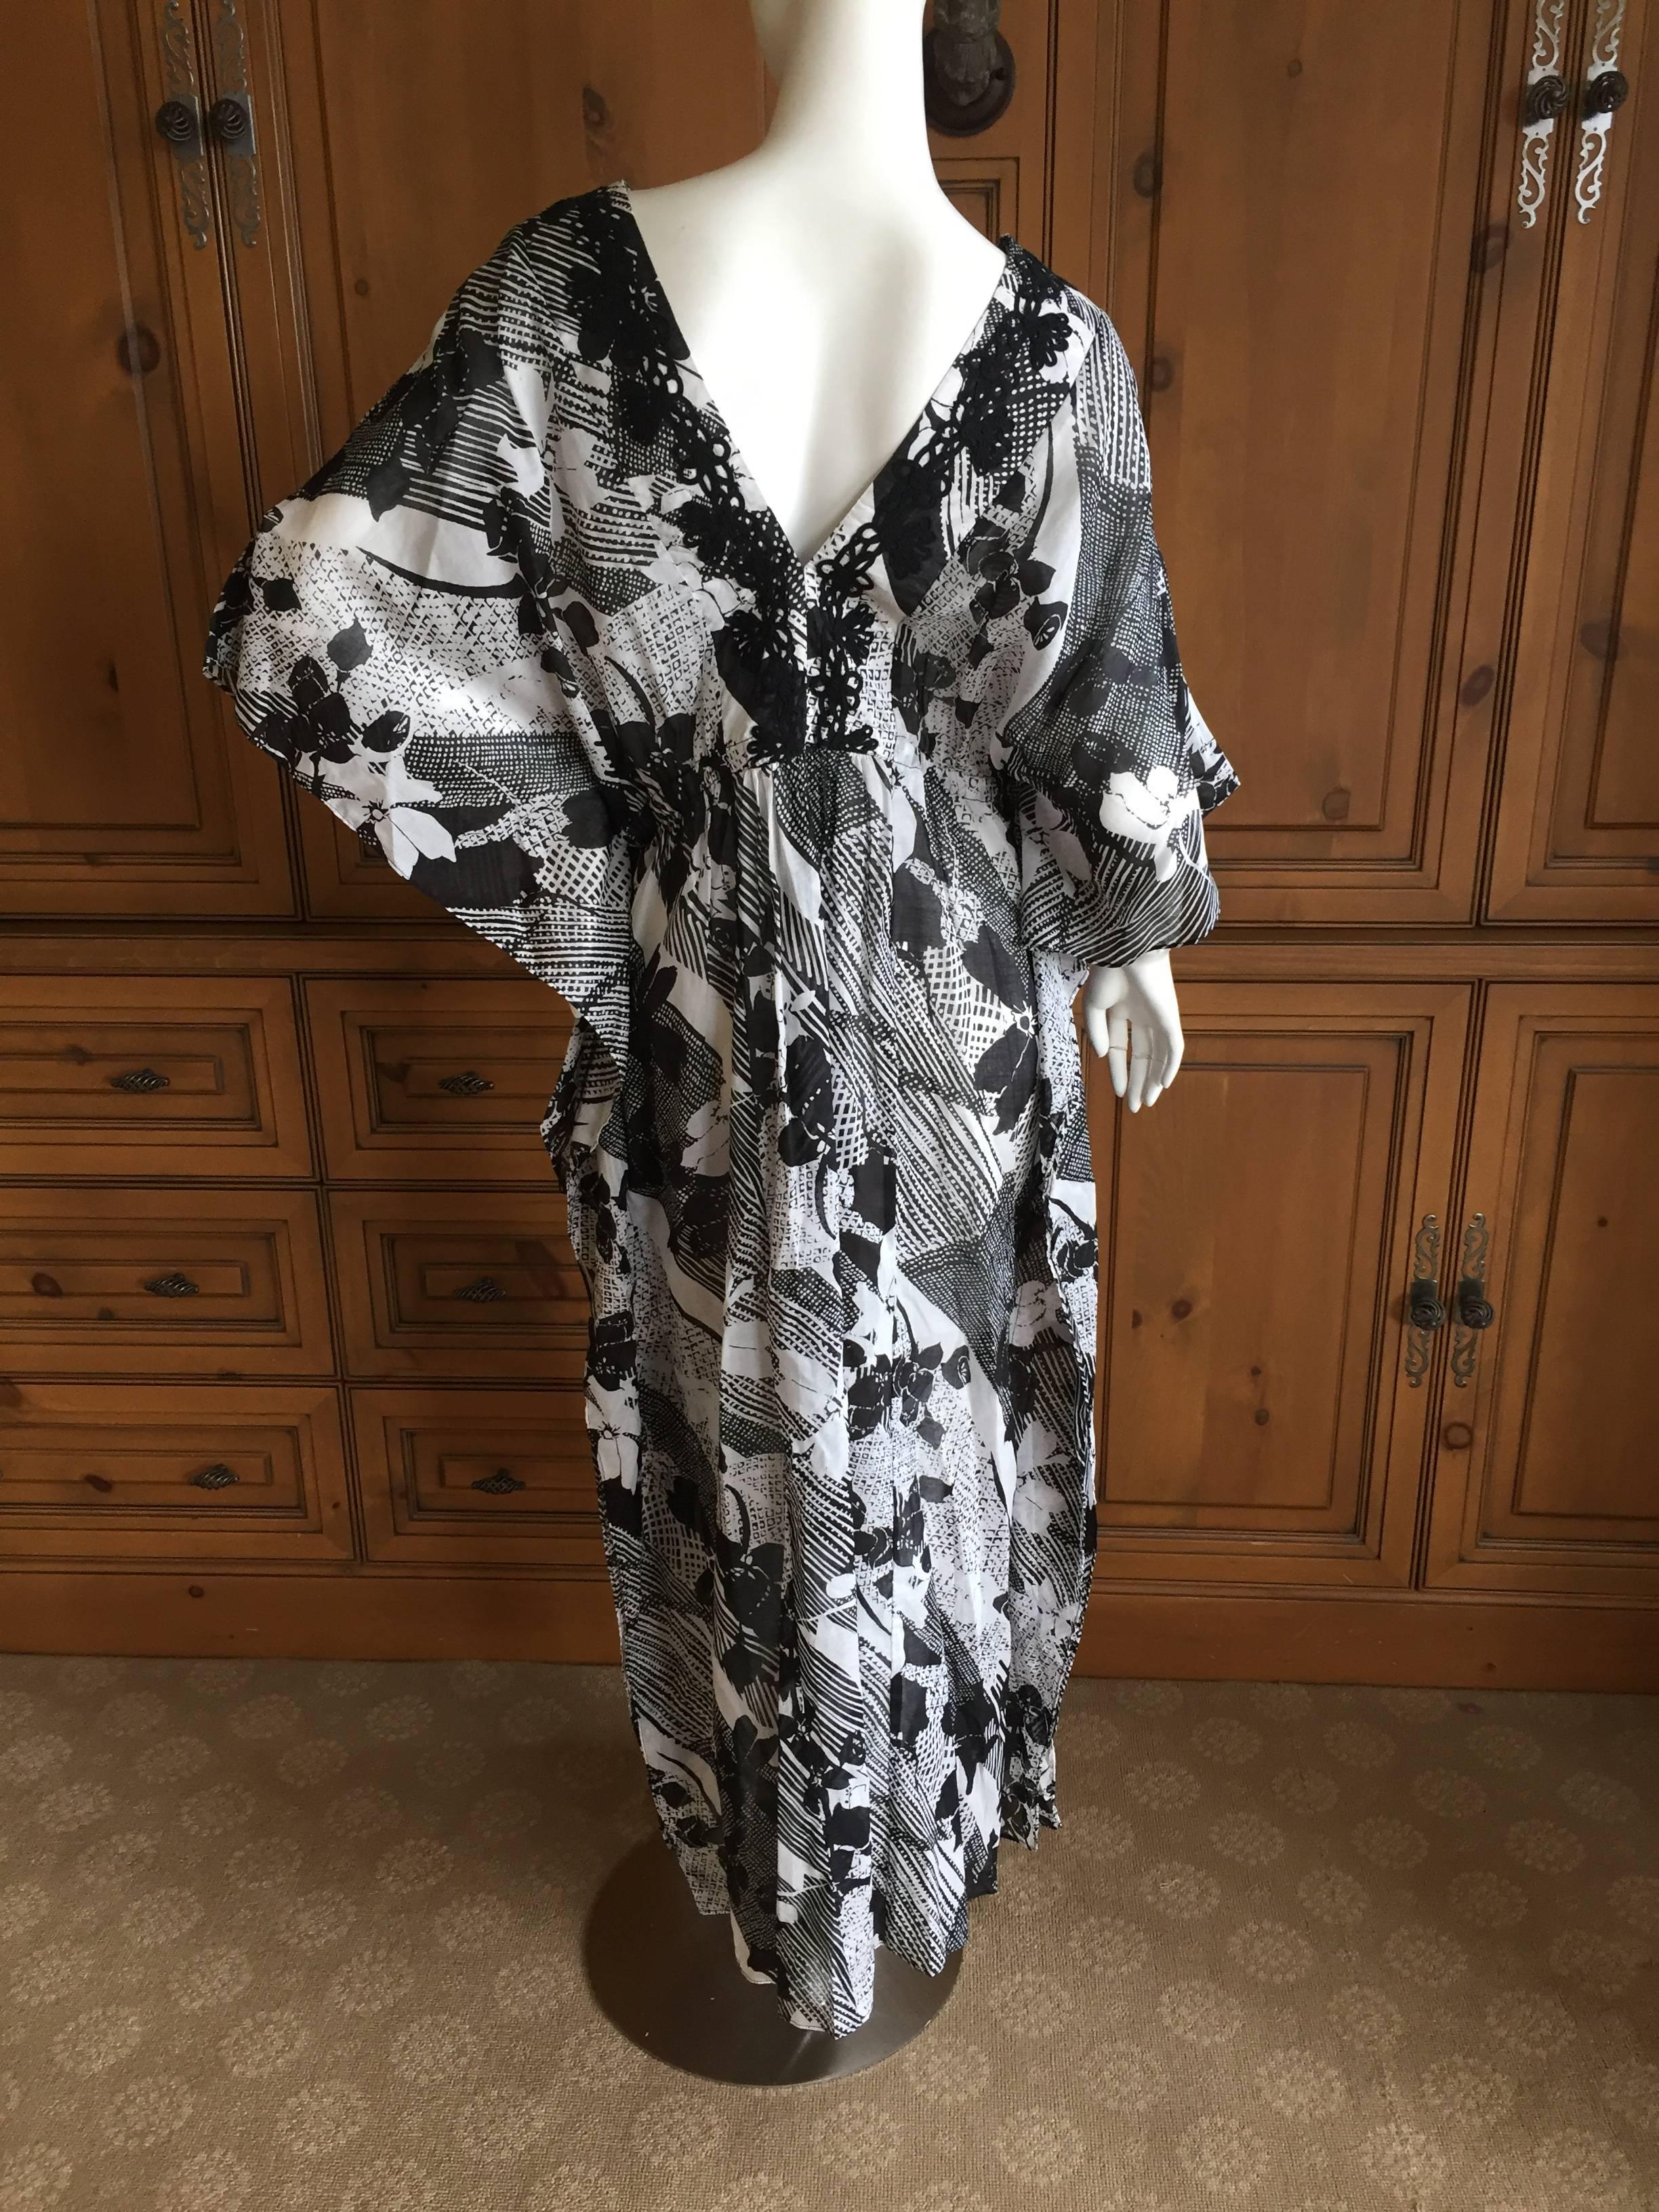 Beautiful fine cotton floral caftan from Oscar de la Renta. 
Embellished with embroidery at bust.
New with tags.
Size XL
BUst 44